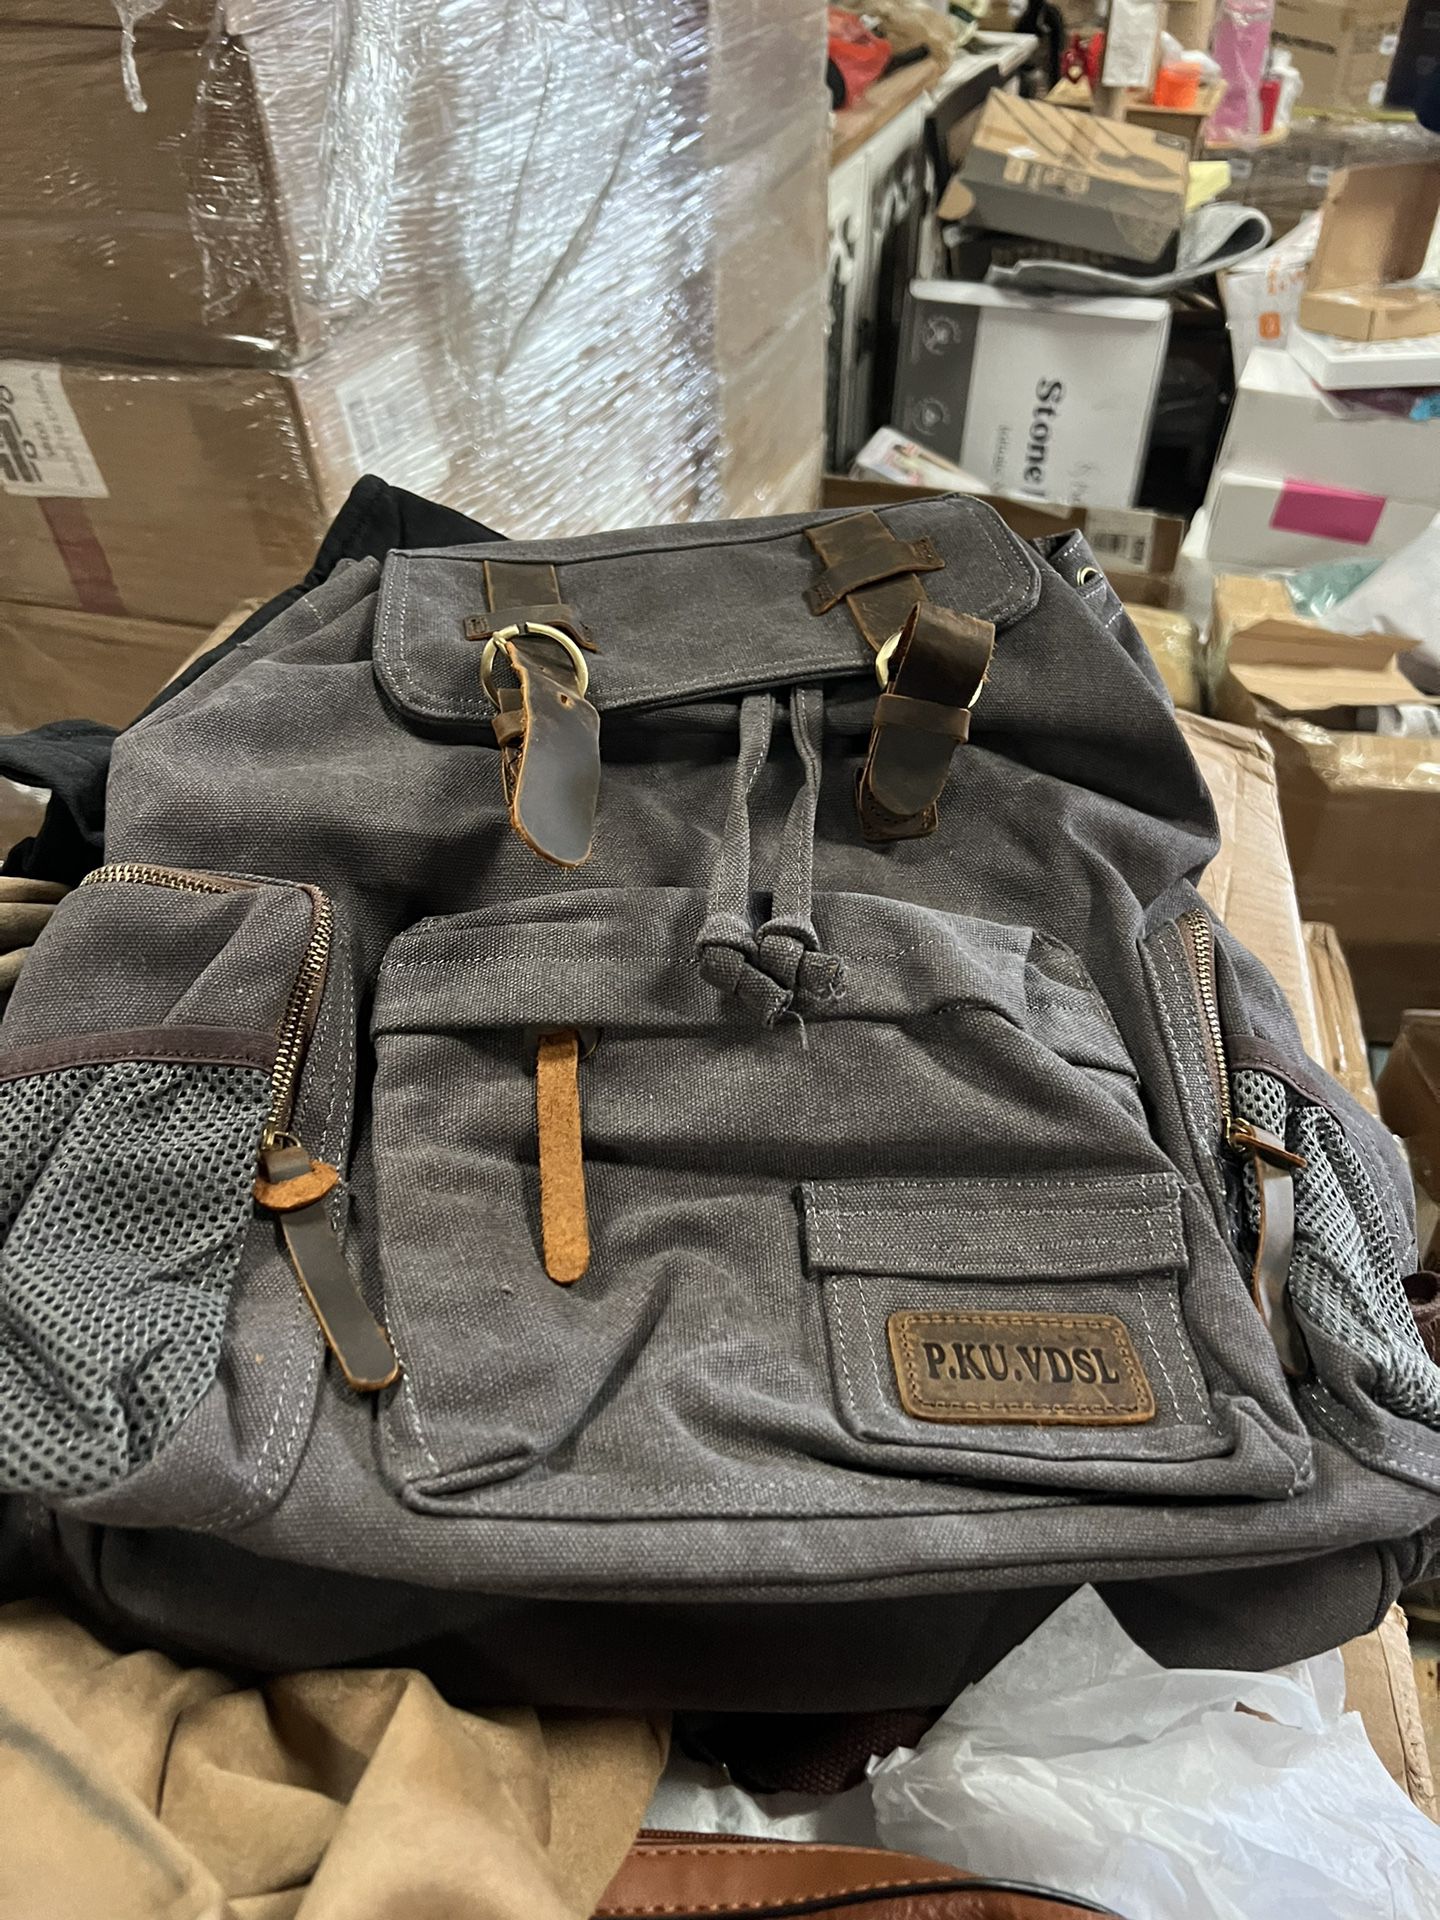 New bags for wholesale